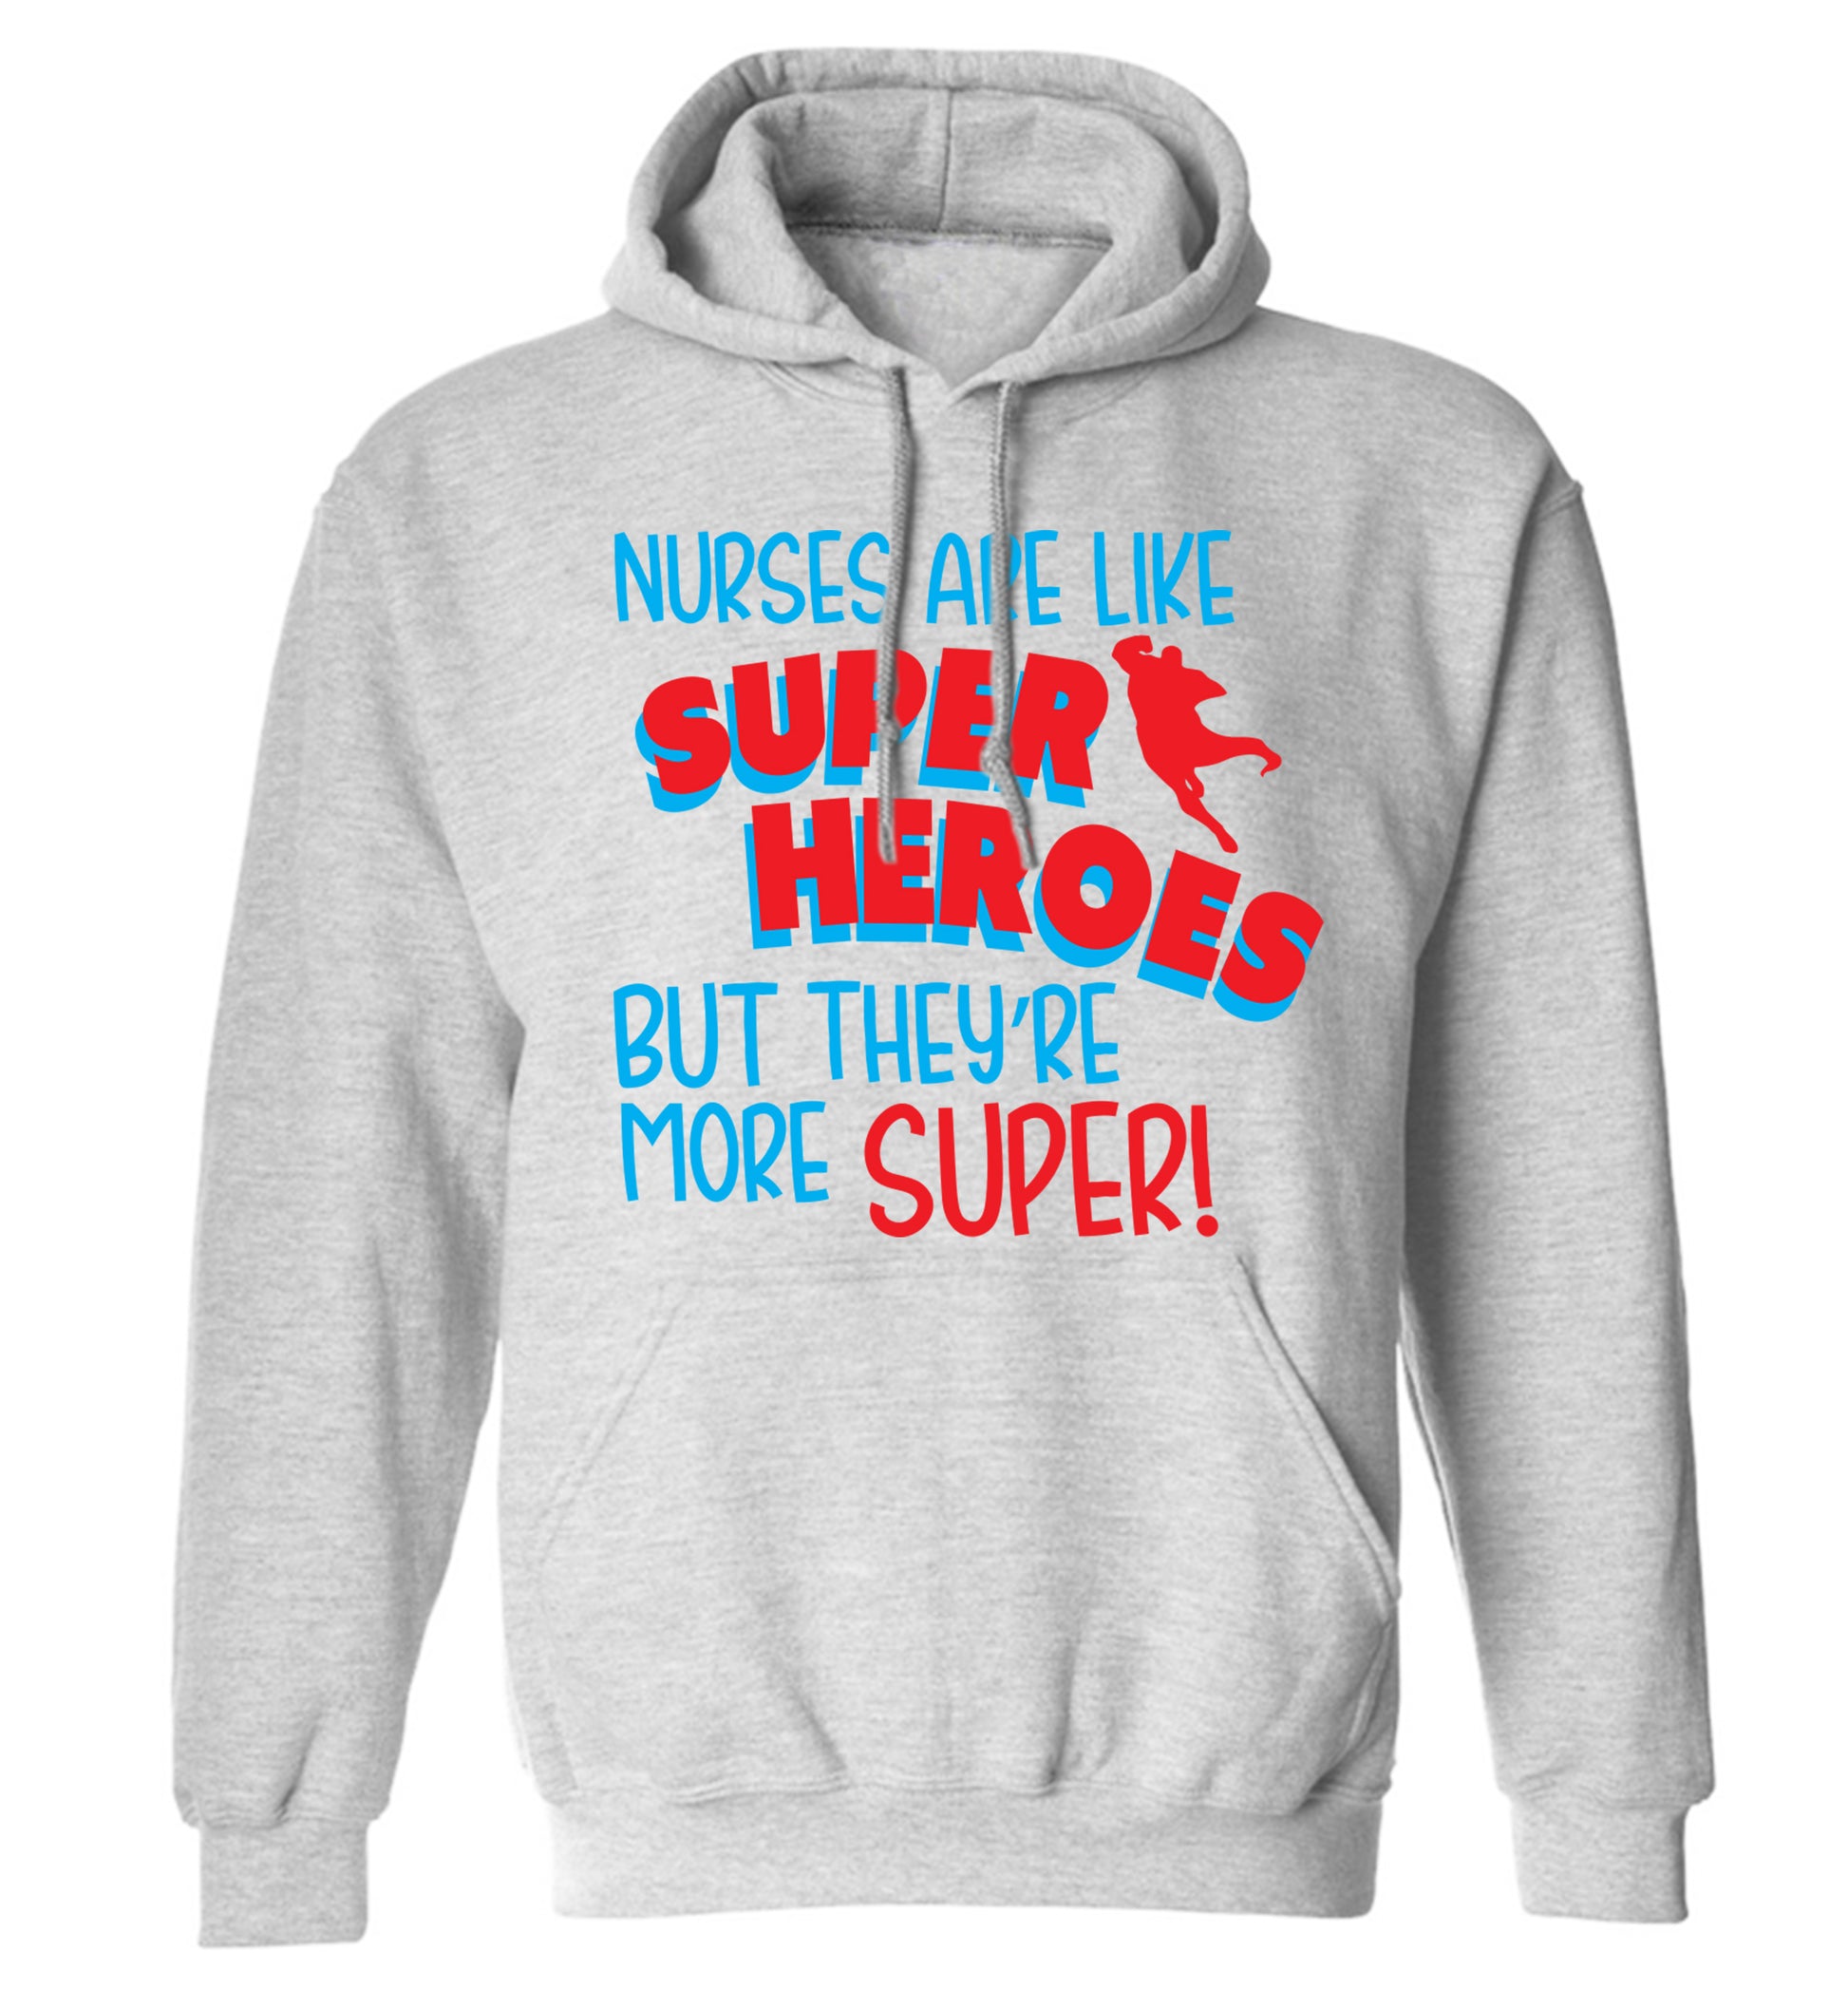 Nurses are like superheros but they're more super adults unisex grey hoodie 2XL